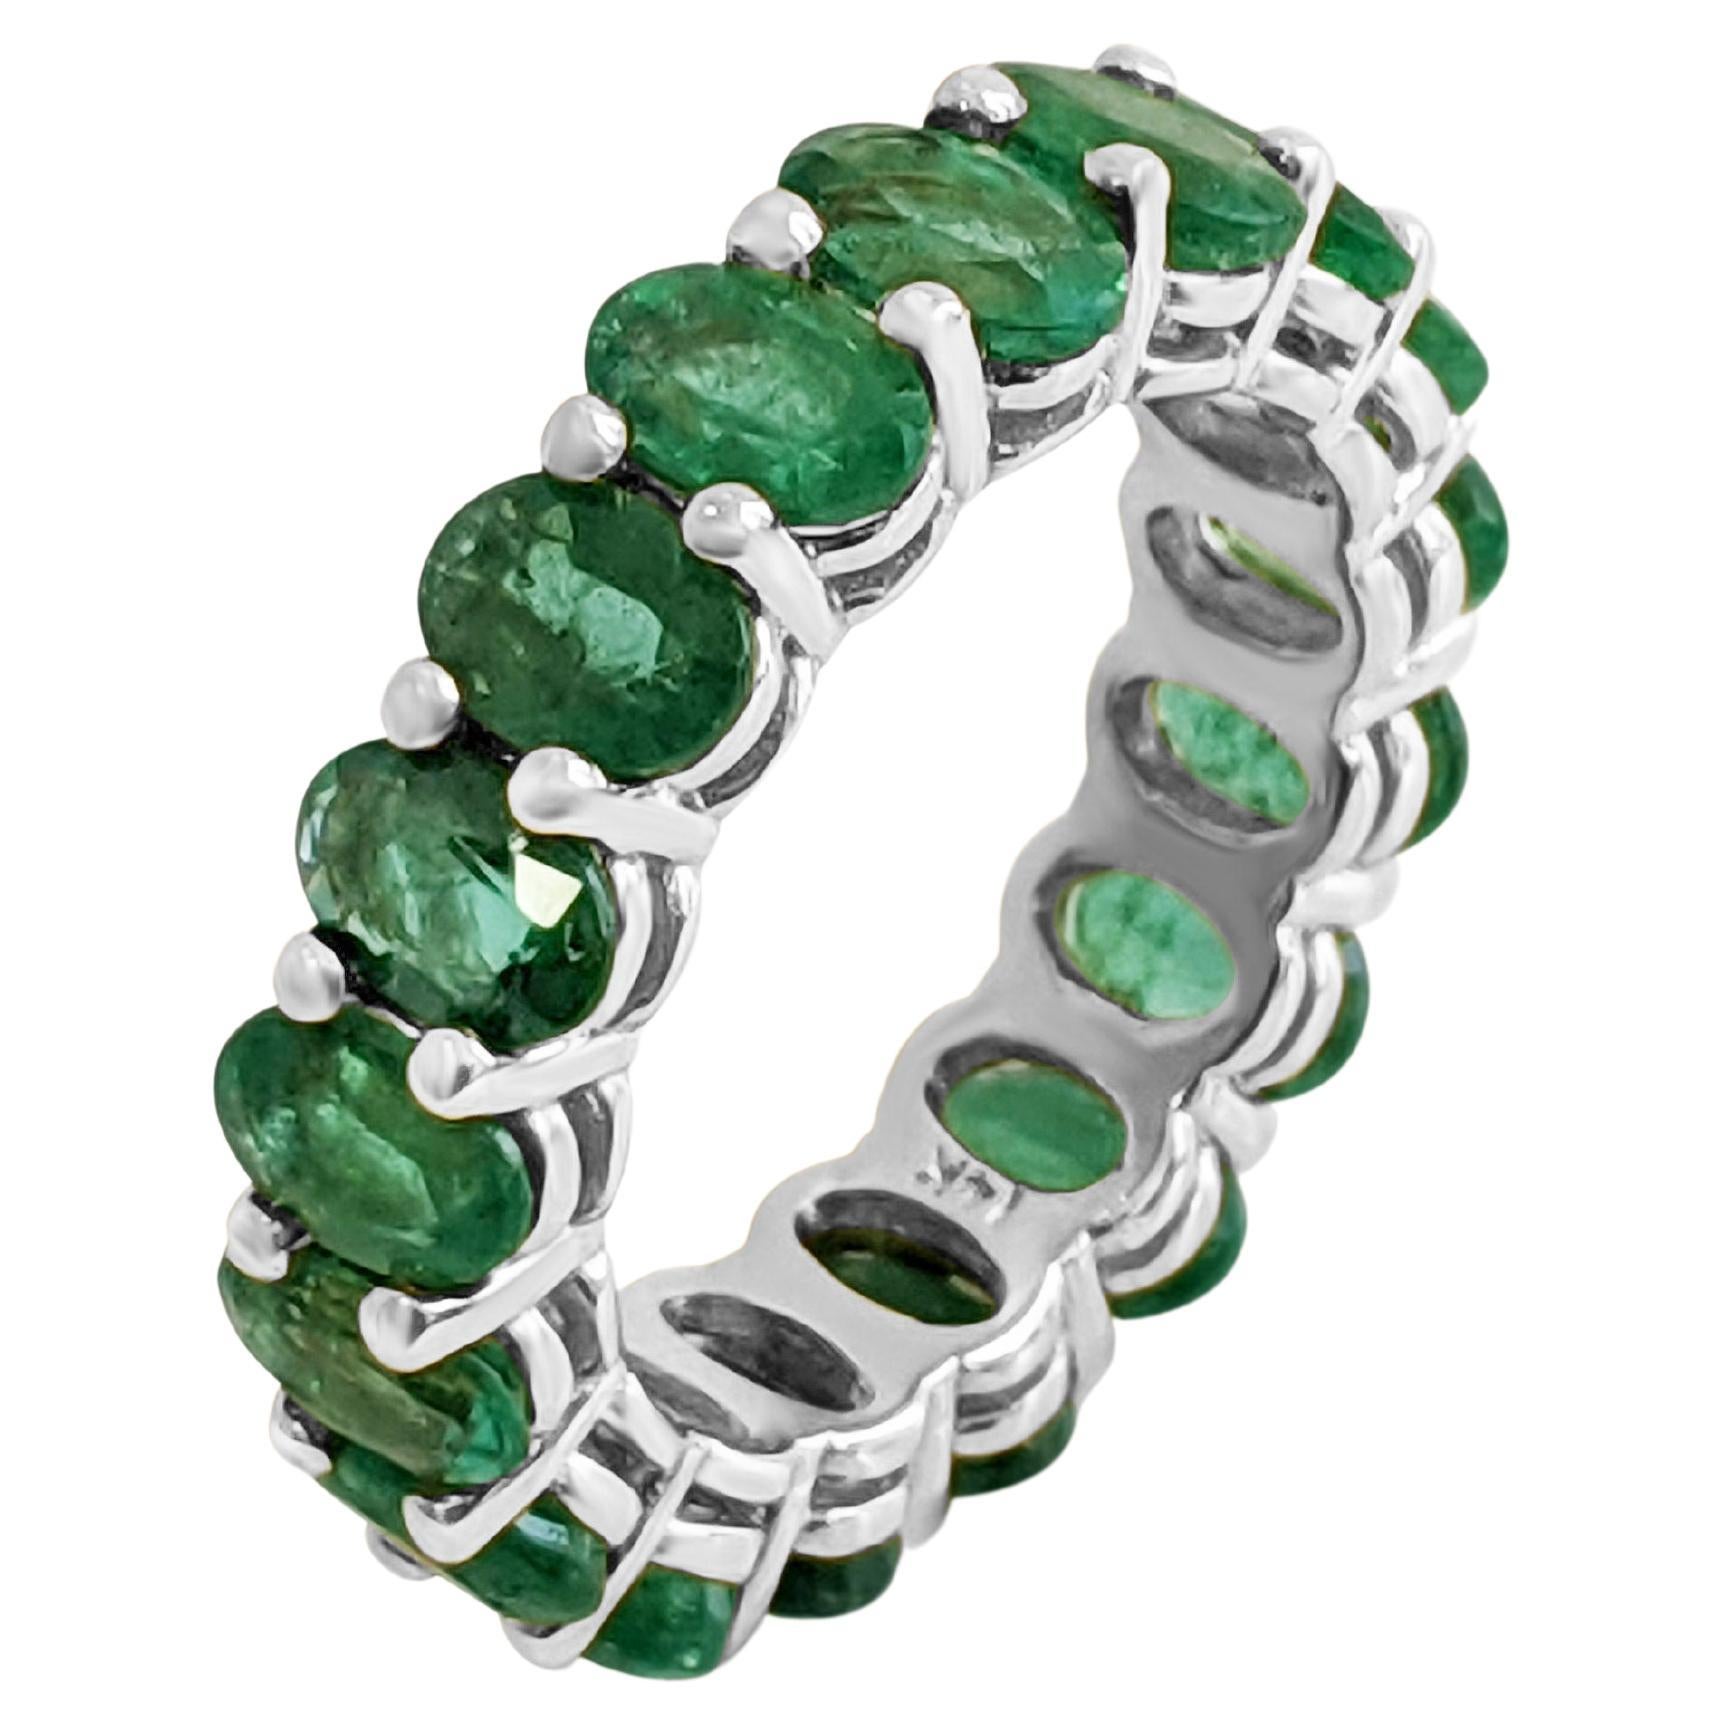 Center Natural Emerald:
Weight: 8.42 ct, 17 stones
Colour: Green
Shape: Oval Mixed

Solid 14k White Gold Ring

Item ships from Israeli Diamonds Exchange, customers are responsible for any local customs or VAT fees that might apply to the purchase.